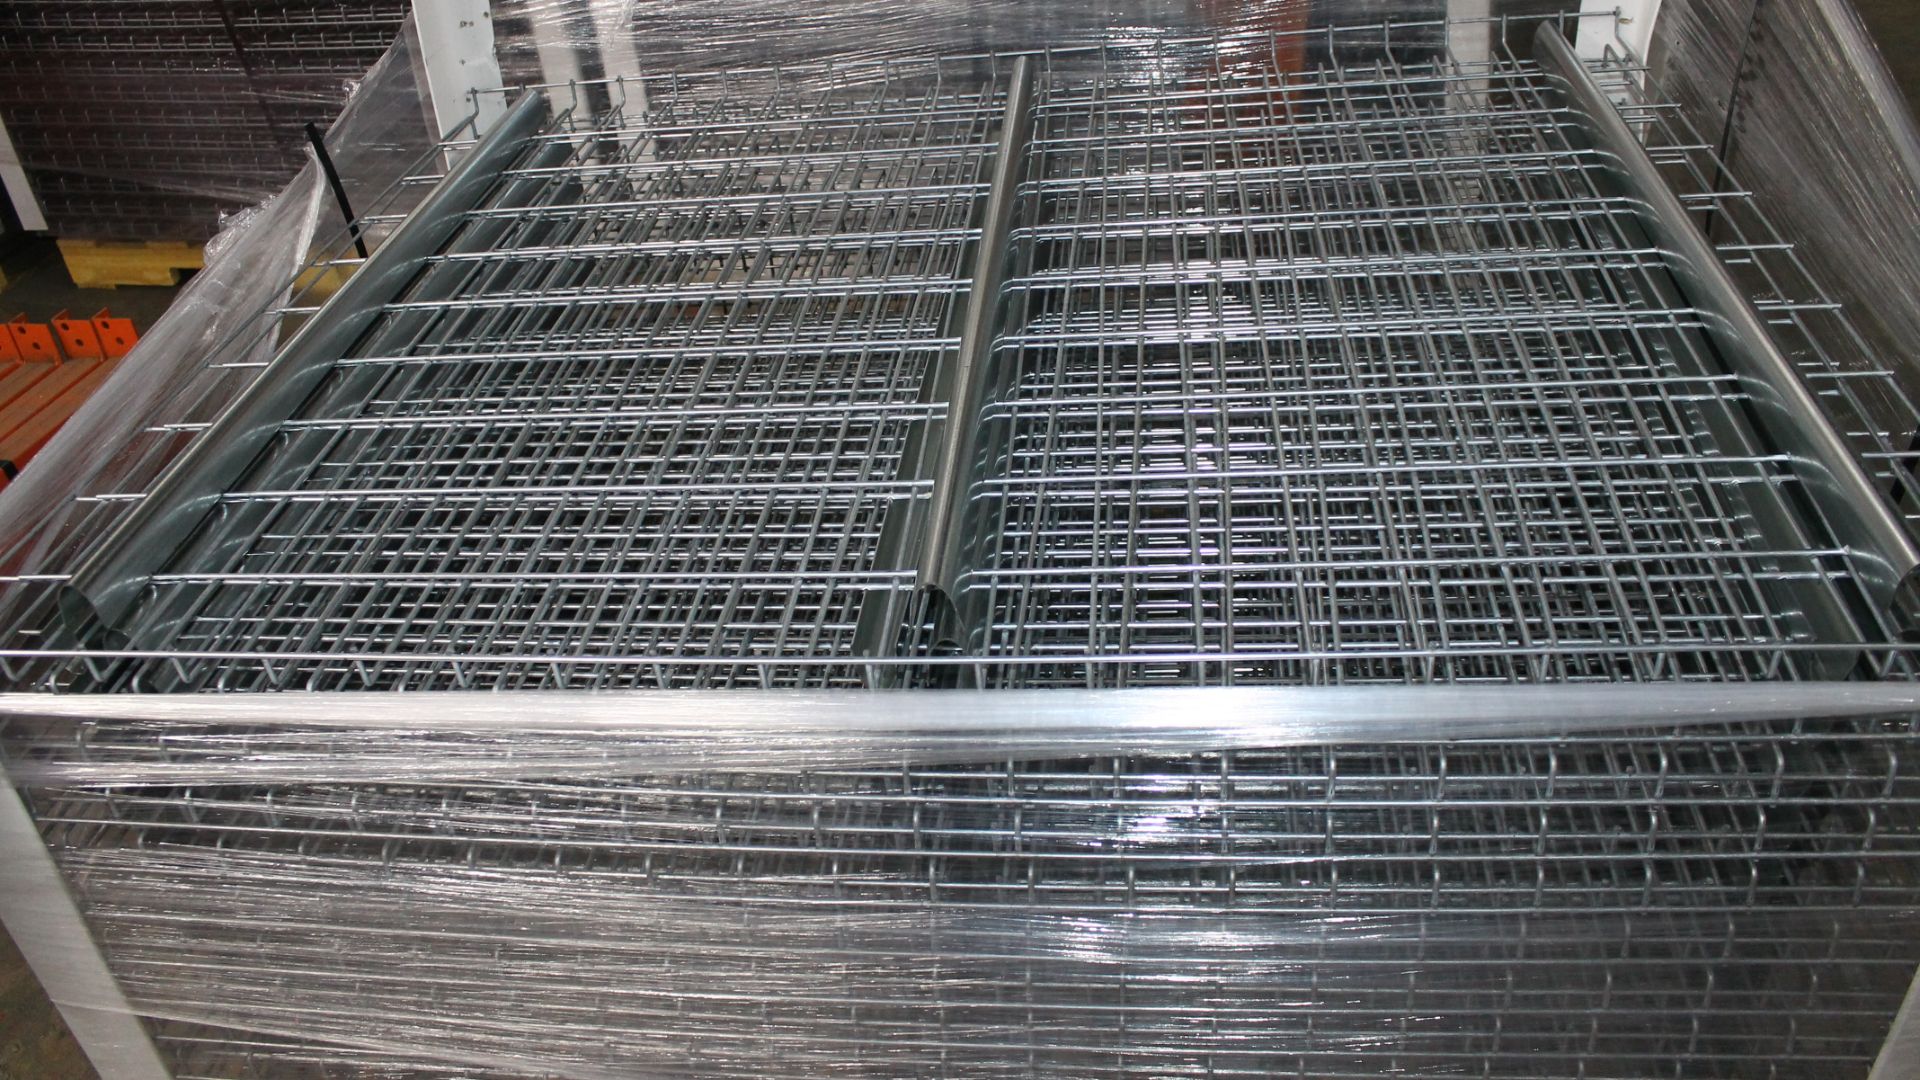 NEW 80 PCS OF STANDARD 42" X 53" WIREDECK - 2050 LBS CAPACITY - Image 2 of 3